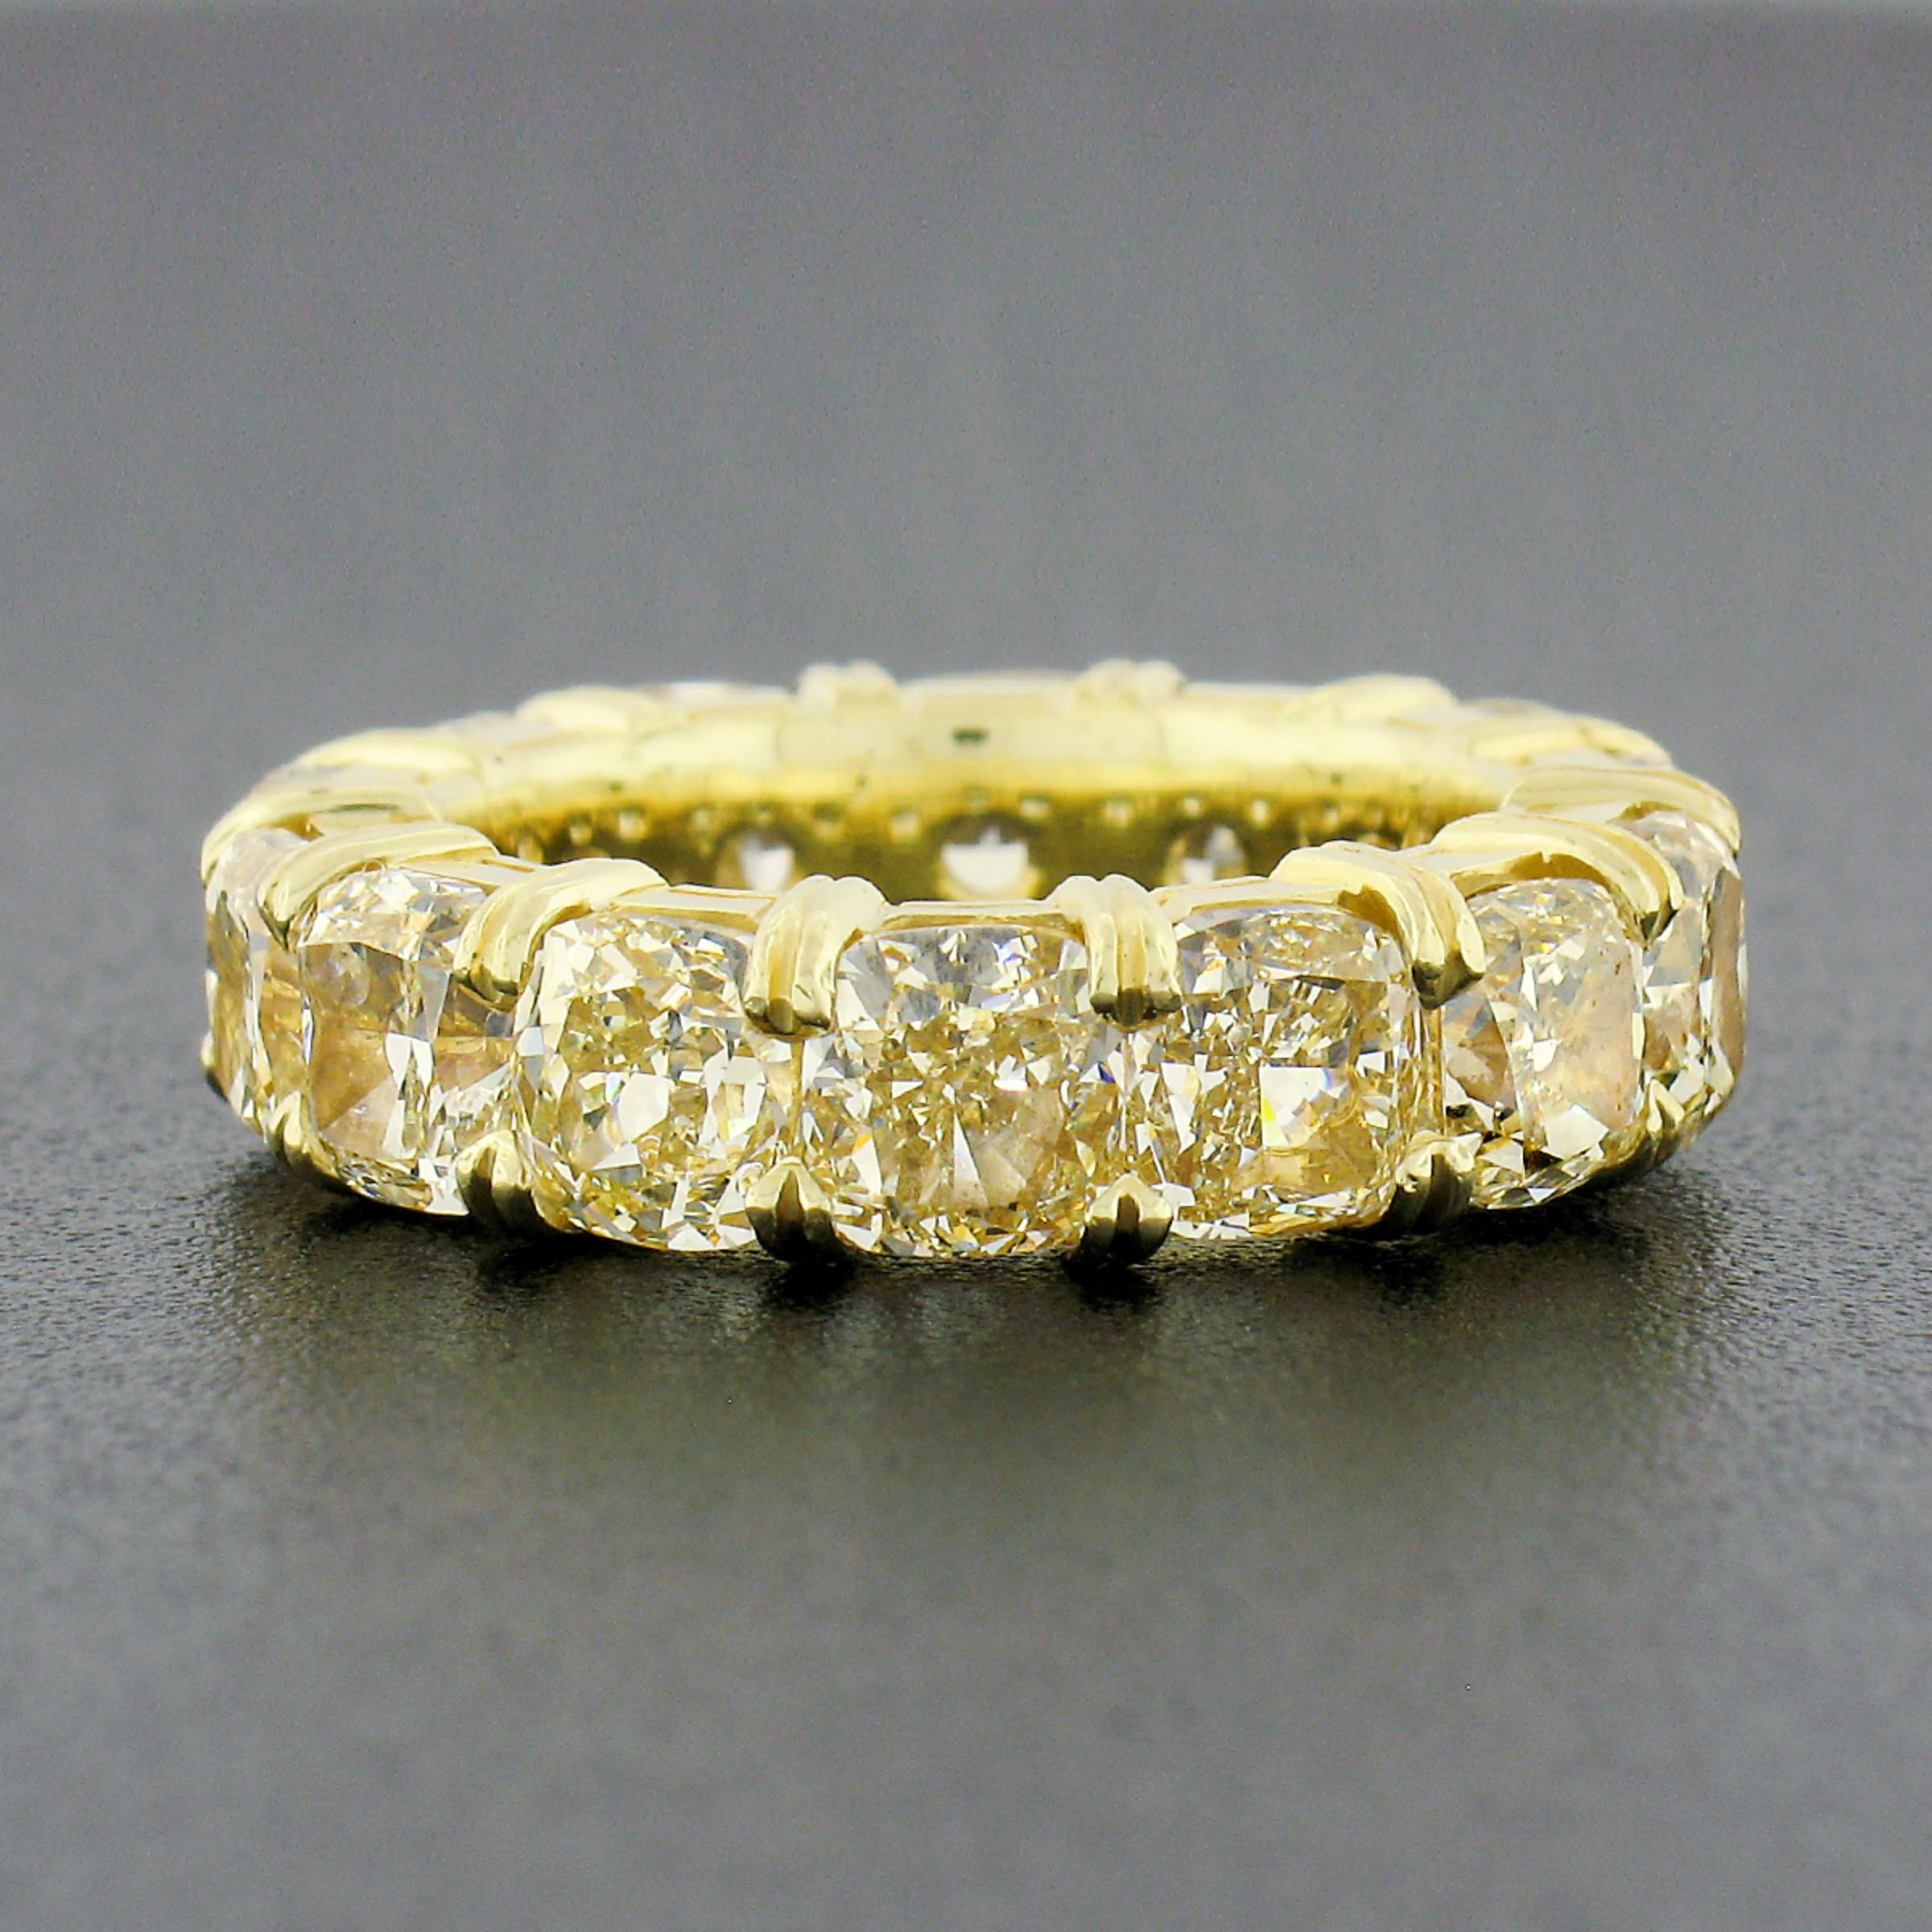 This spectacular diamond eternity band ring is crafted from solid 18k yellow gold and features a set of 14 large and fiery cushion cut yellow diamonds which of two have been certified by GIA and come accompanied with the certifications for these 2